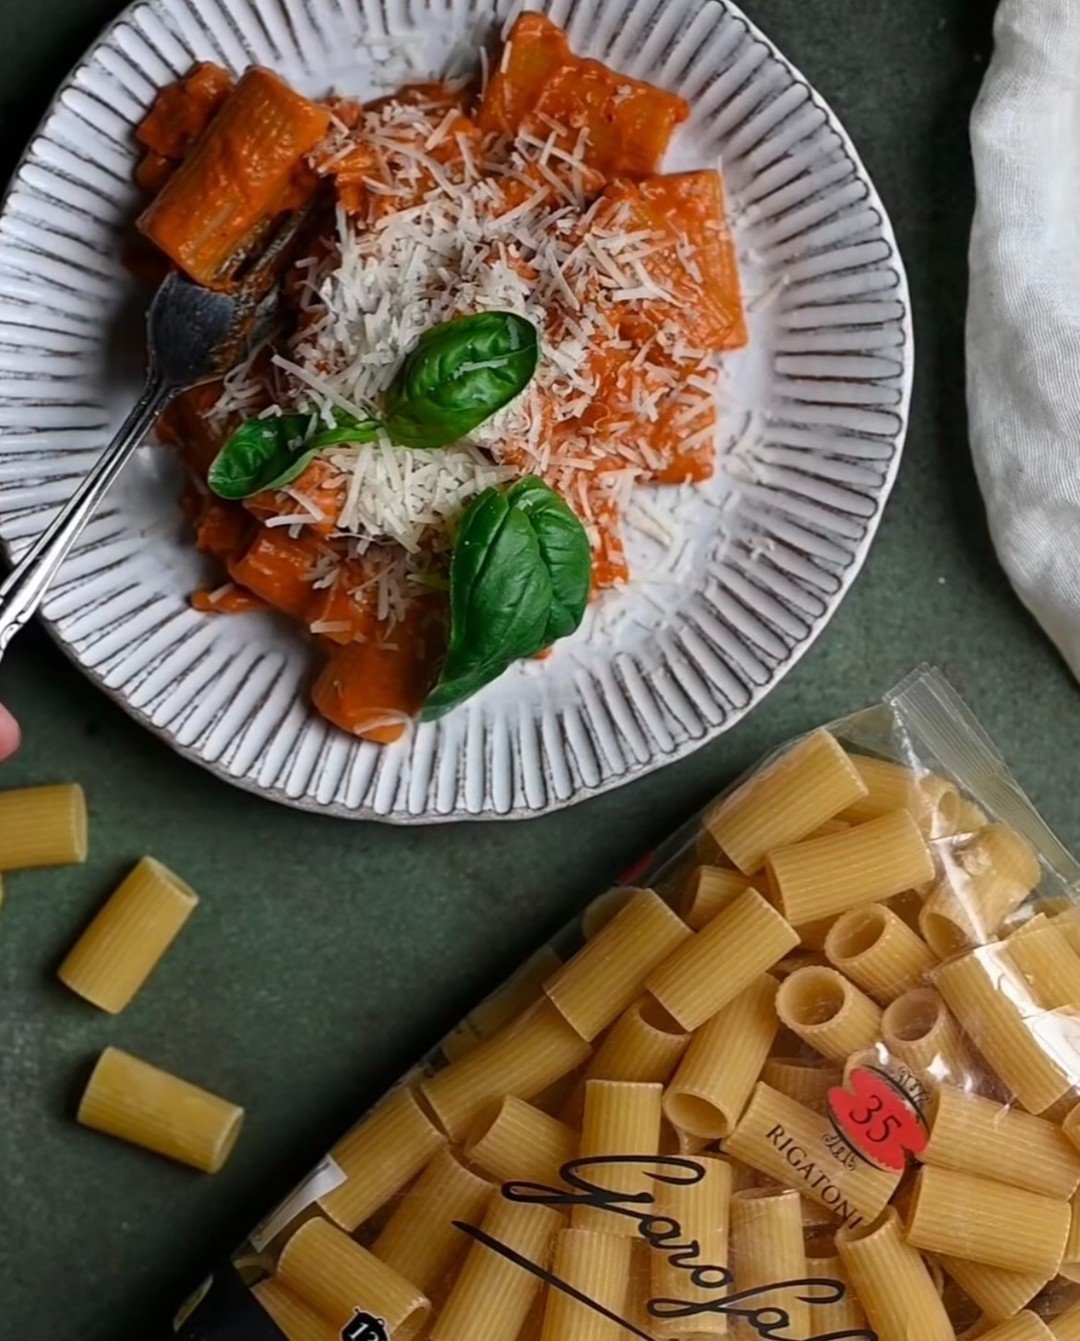 A trip to Italy isn't complete without sampling every pasta dish on the menu 🍴

@theculinarybee's series of recreating her favourite Italian recipes will provide you with the best list of meals to try during your next trip to Le Marche. Visit her pa